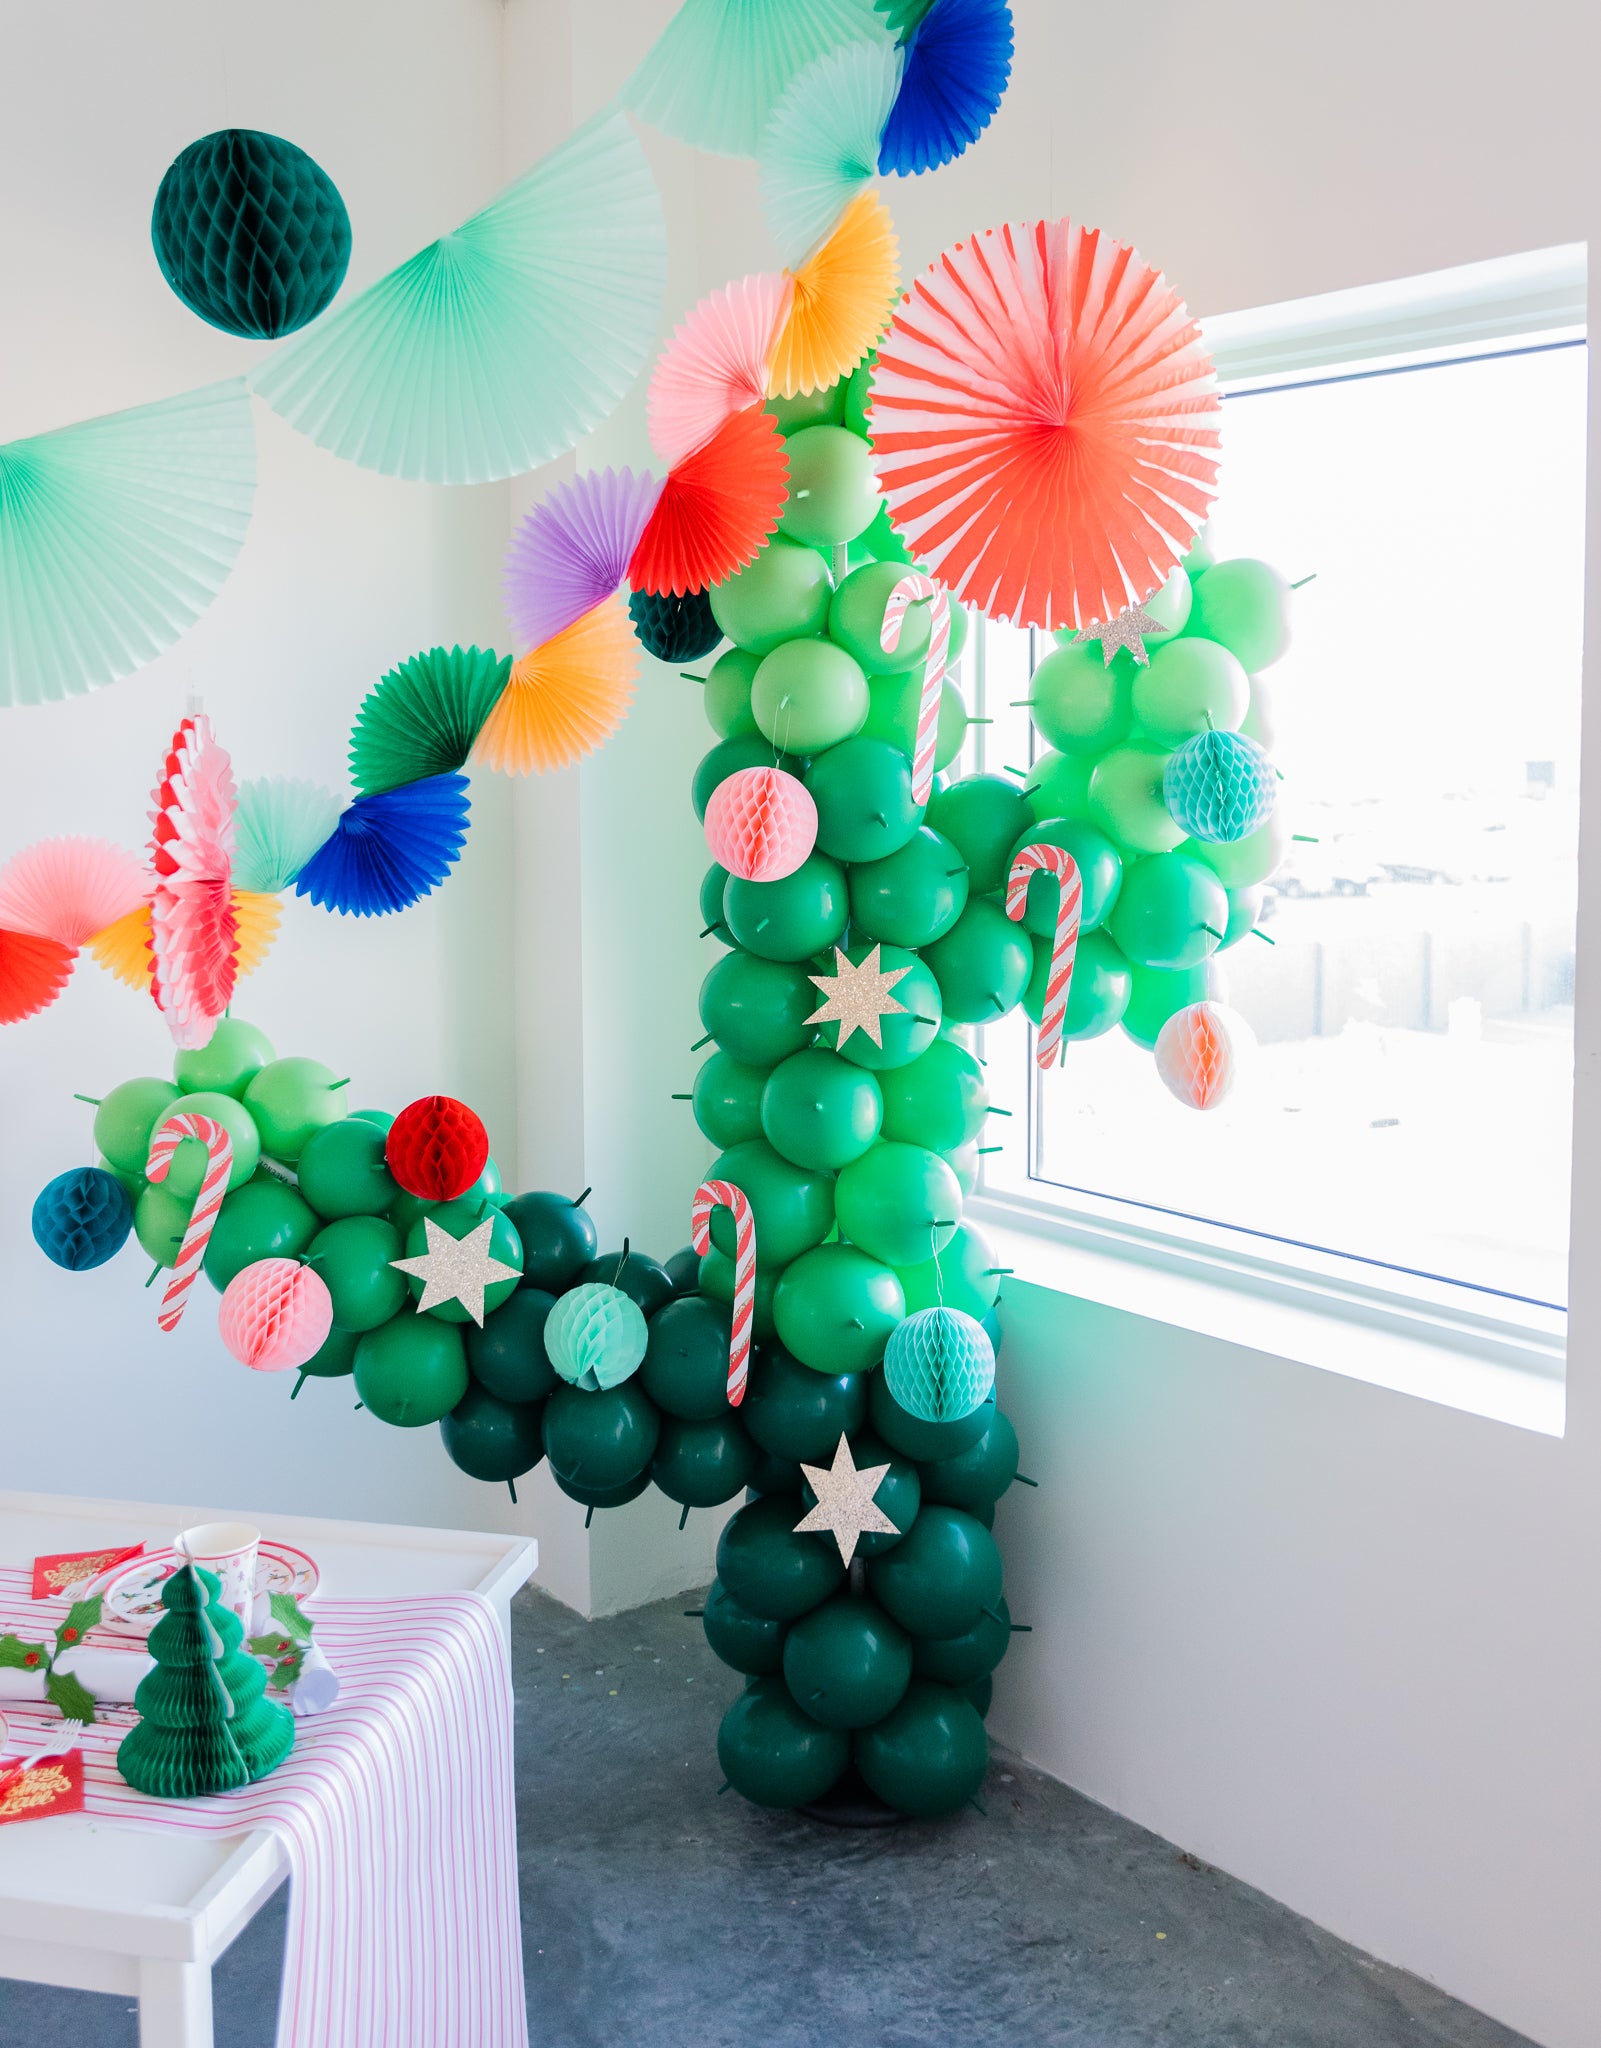 Cactus Christmas tree balloon decoration for a cowboy-themed holiday party.